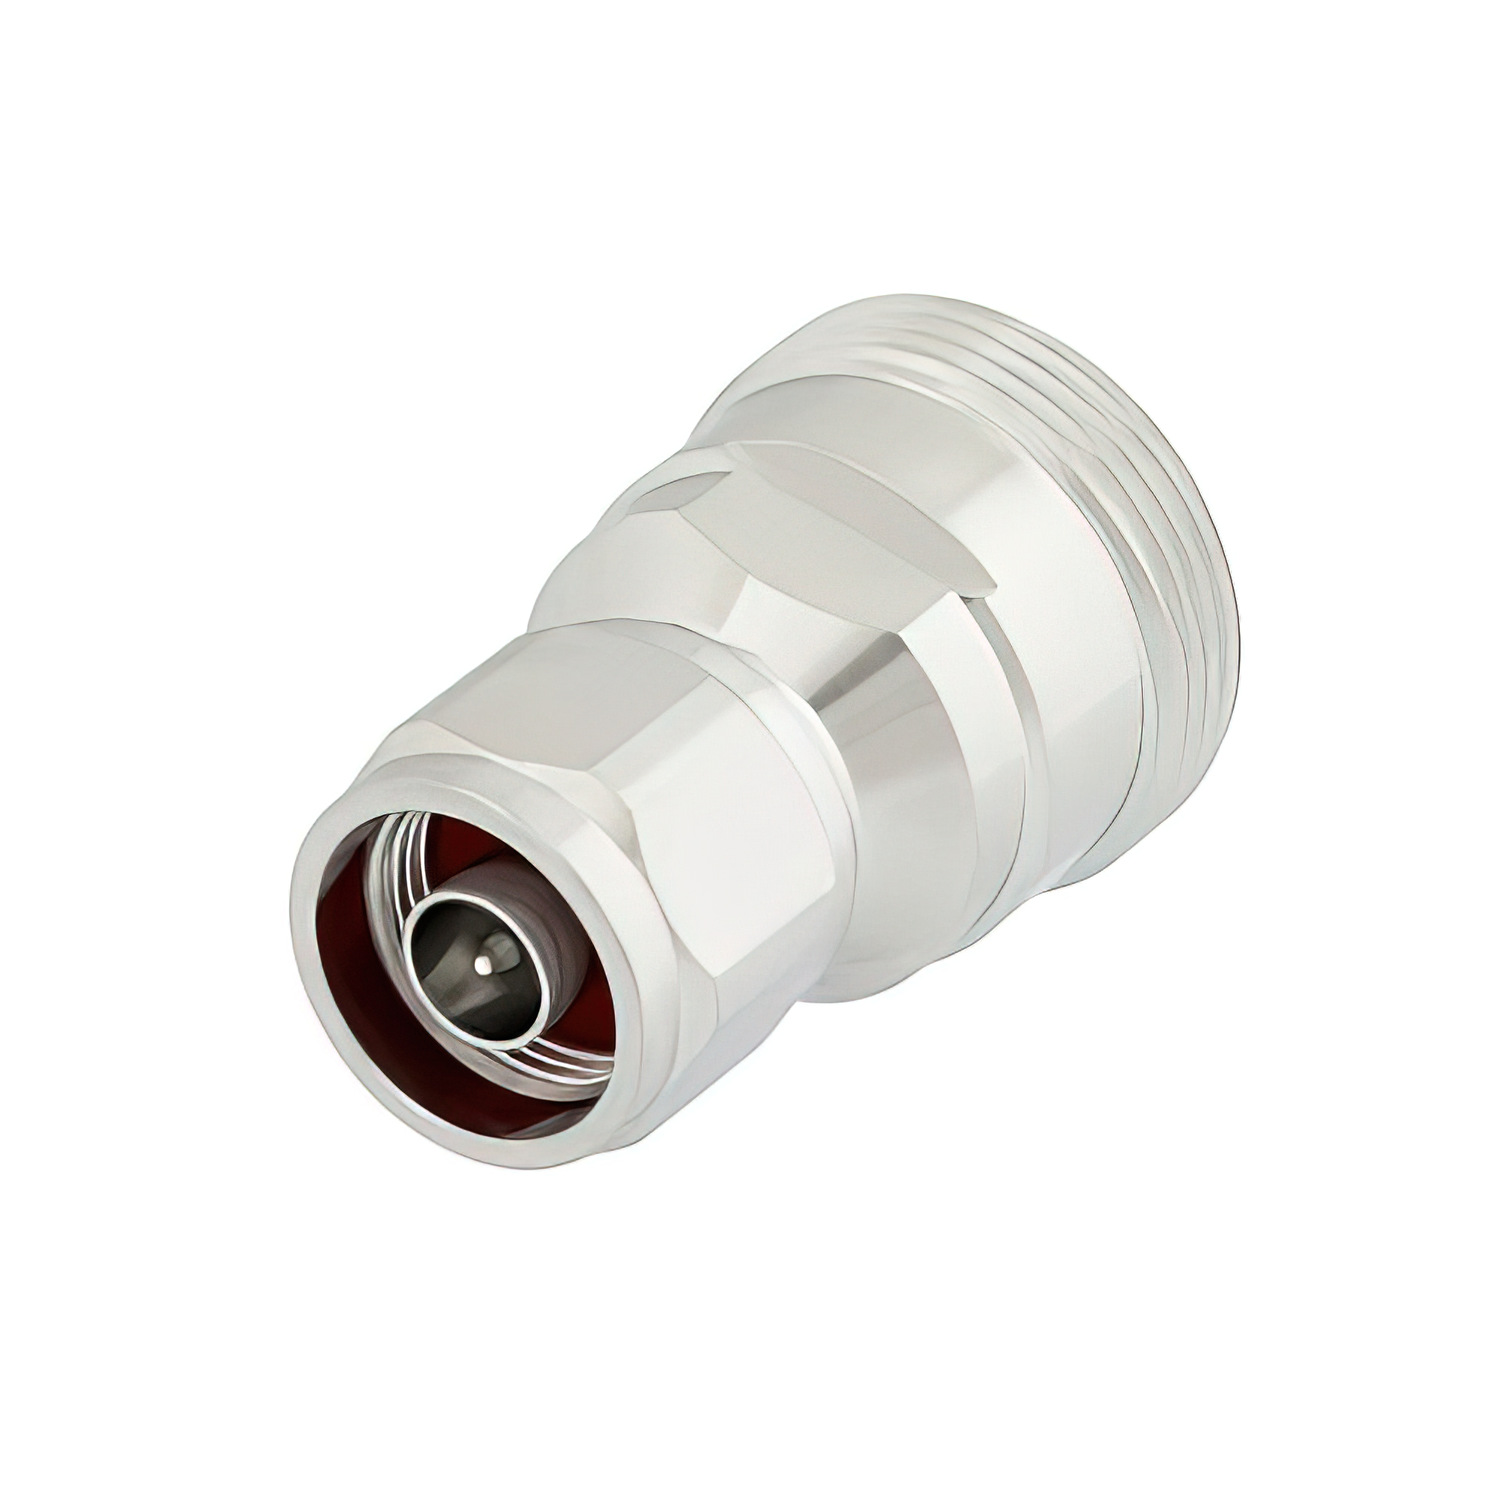 7-16 DIN Female to N Male Adapter 1